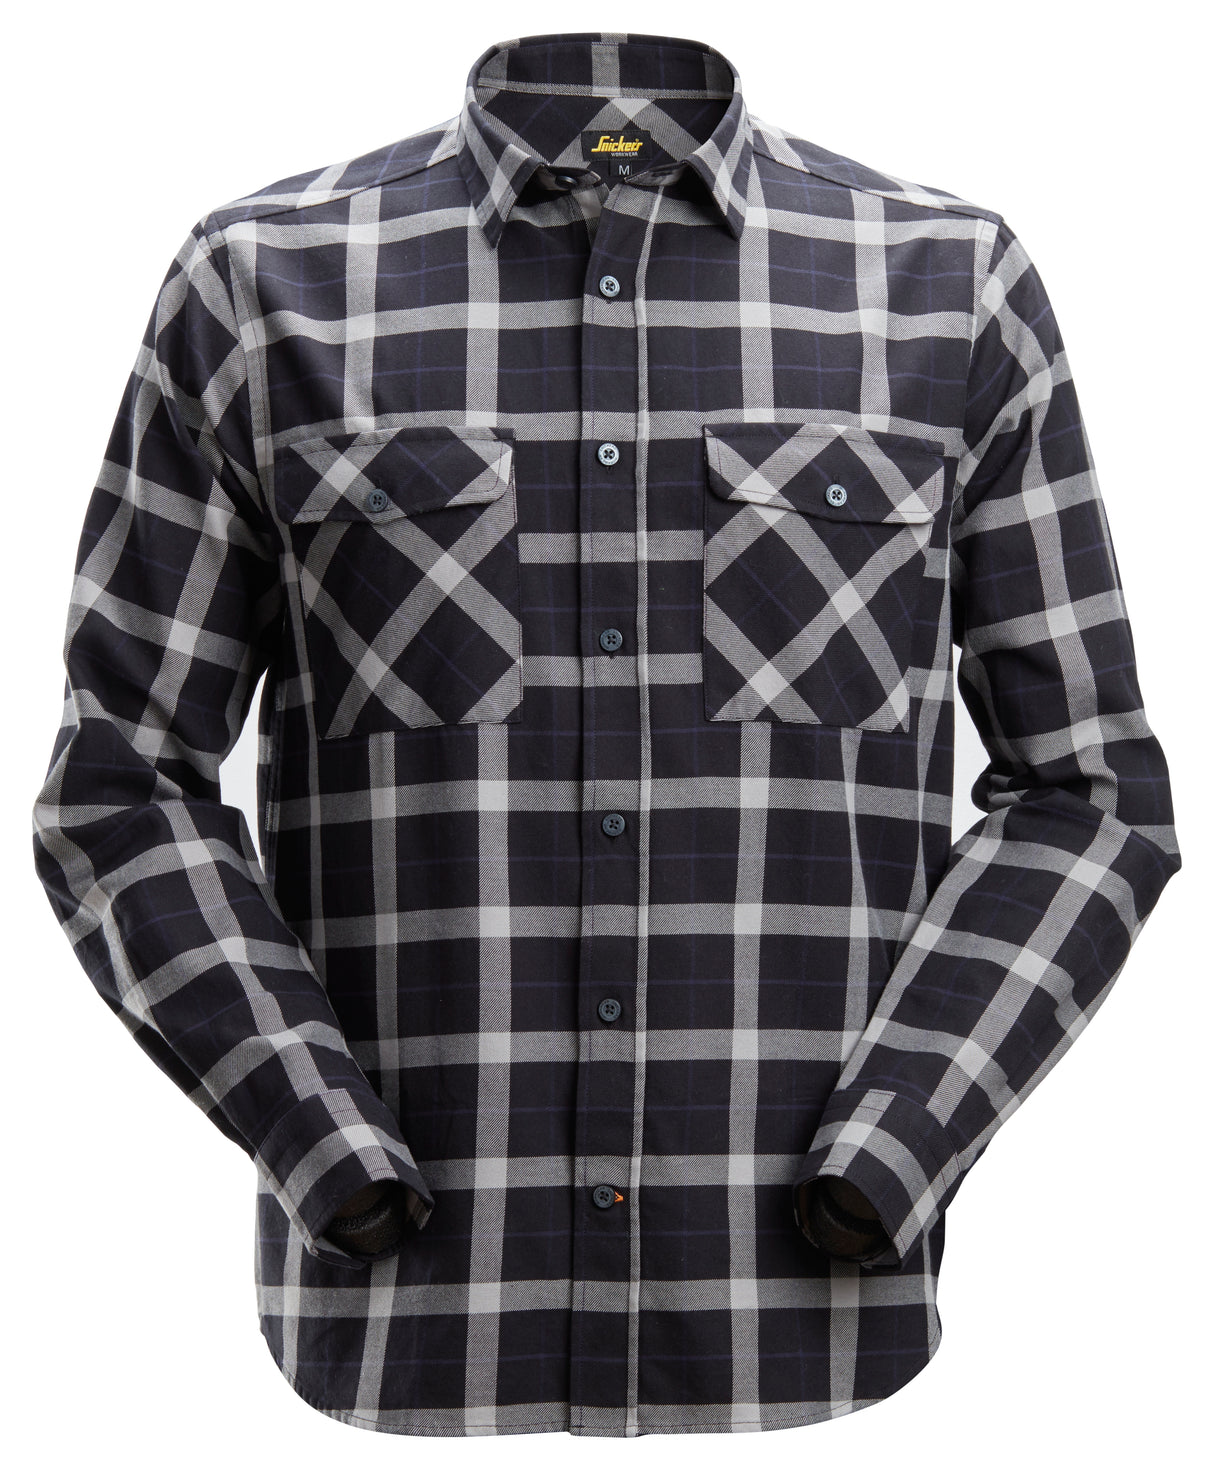 Snickers 8516 Allroundwork Flannel Check Long Sleeve Shirt